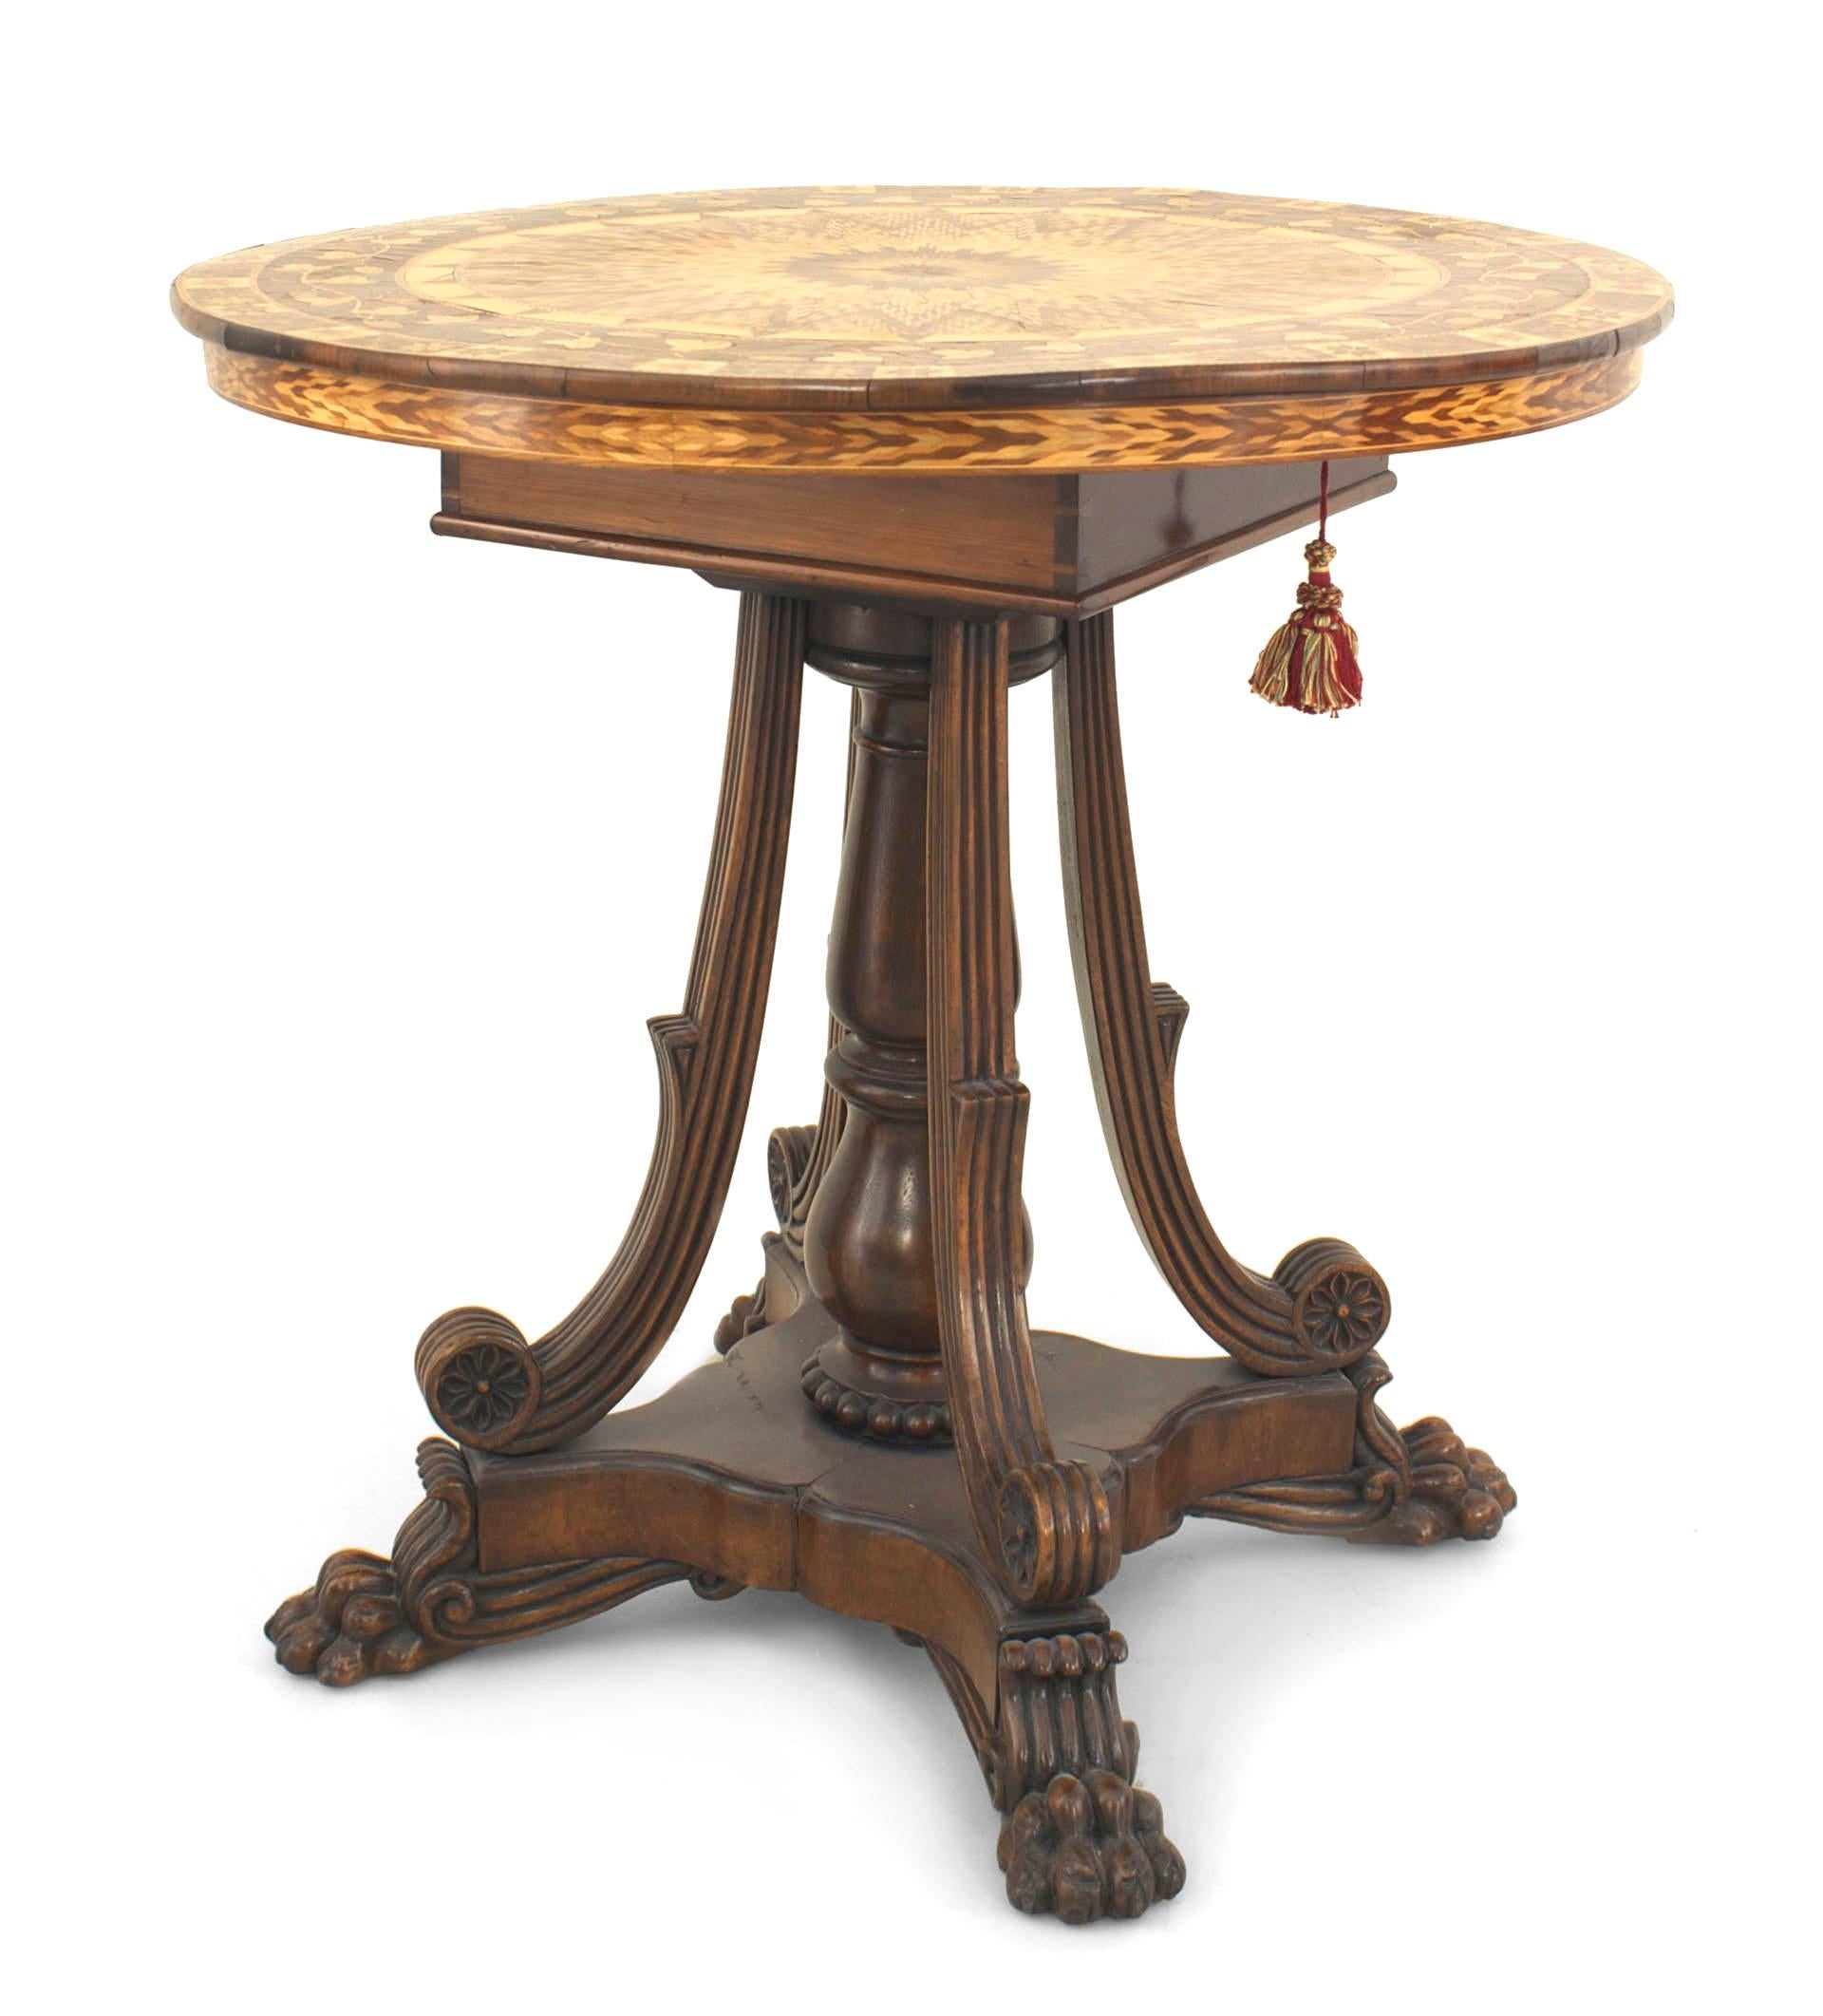 English Regency style (mid-19th century) mahogany end table with a round multi-wood marquetry flip-top revealing a lap desk over the pedestal base with four scroll support legs.